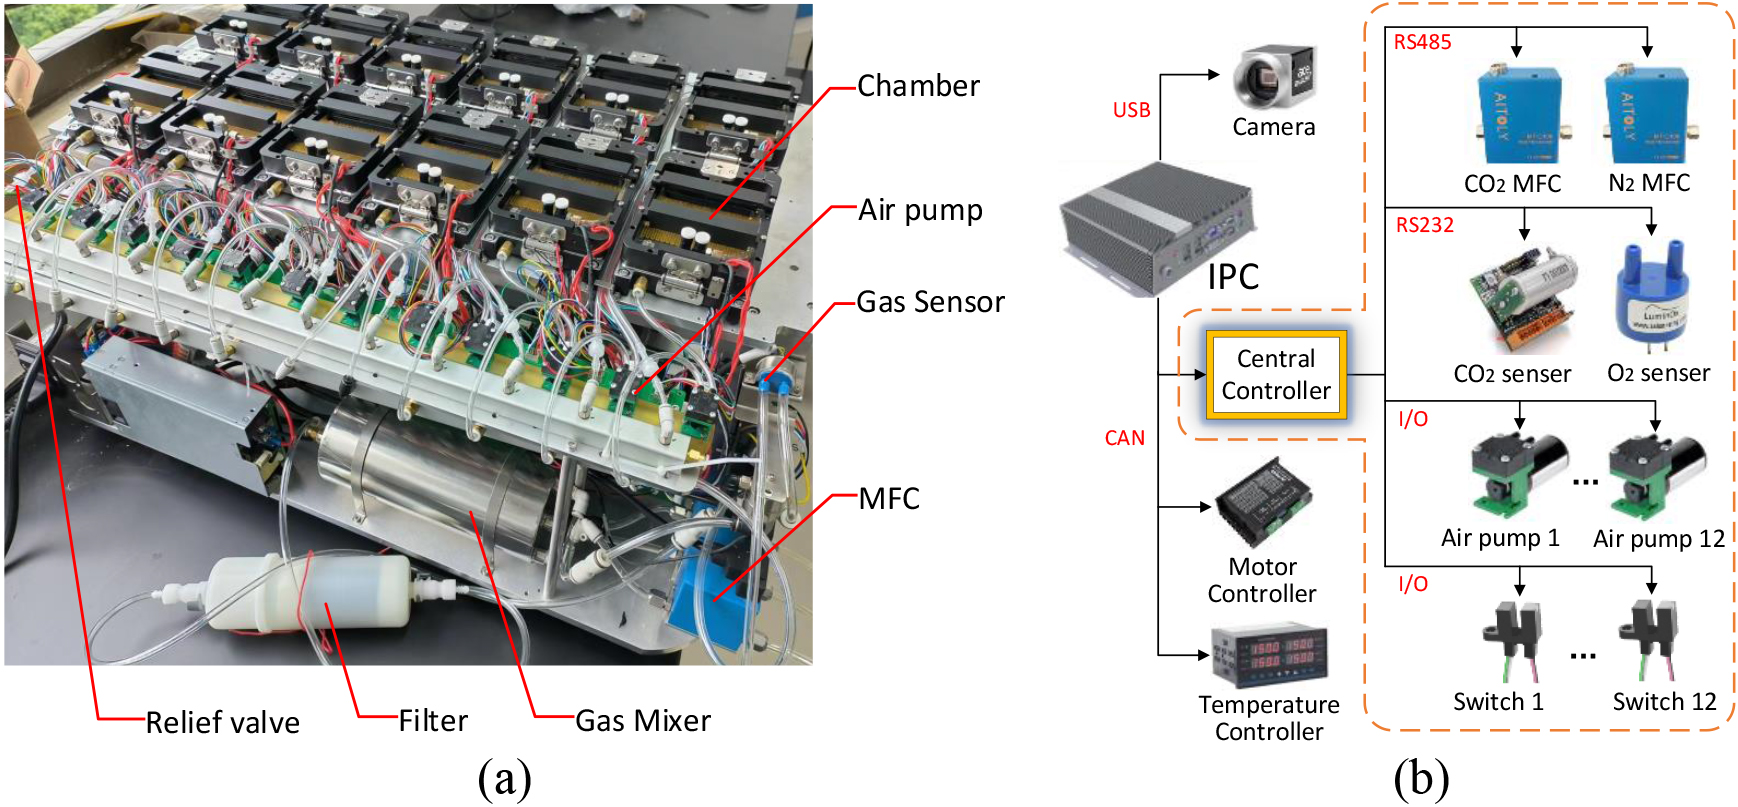 A system-based multi-chamber time-lapse embryo incubator. (a) Layout of the relevant components of the gas system. (b) The control structure of the incubator. The gas mixing and distribution system is circled with a dashed line.